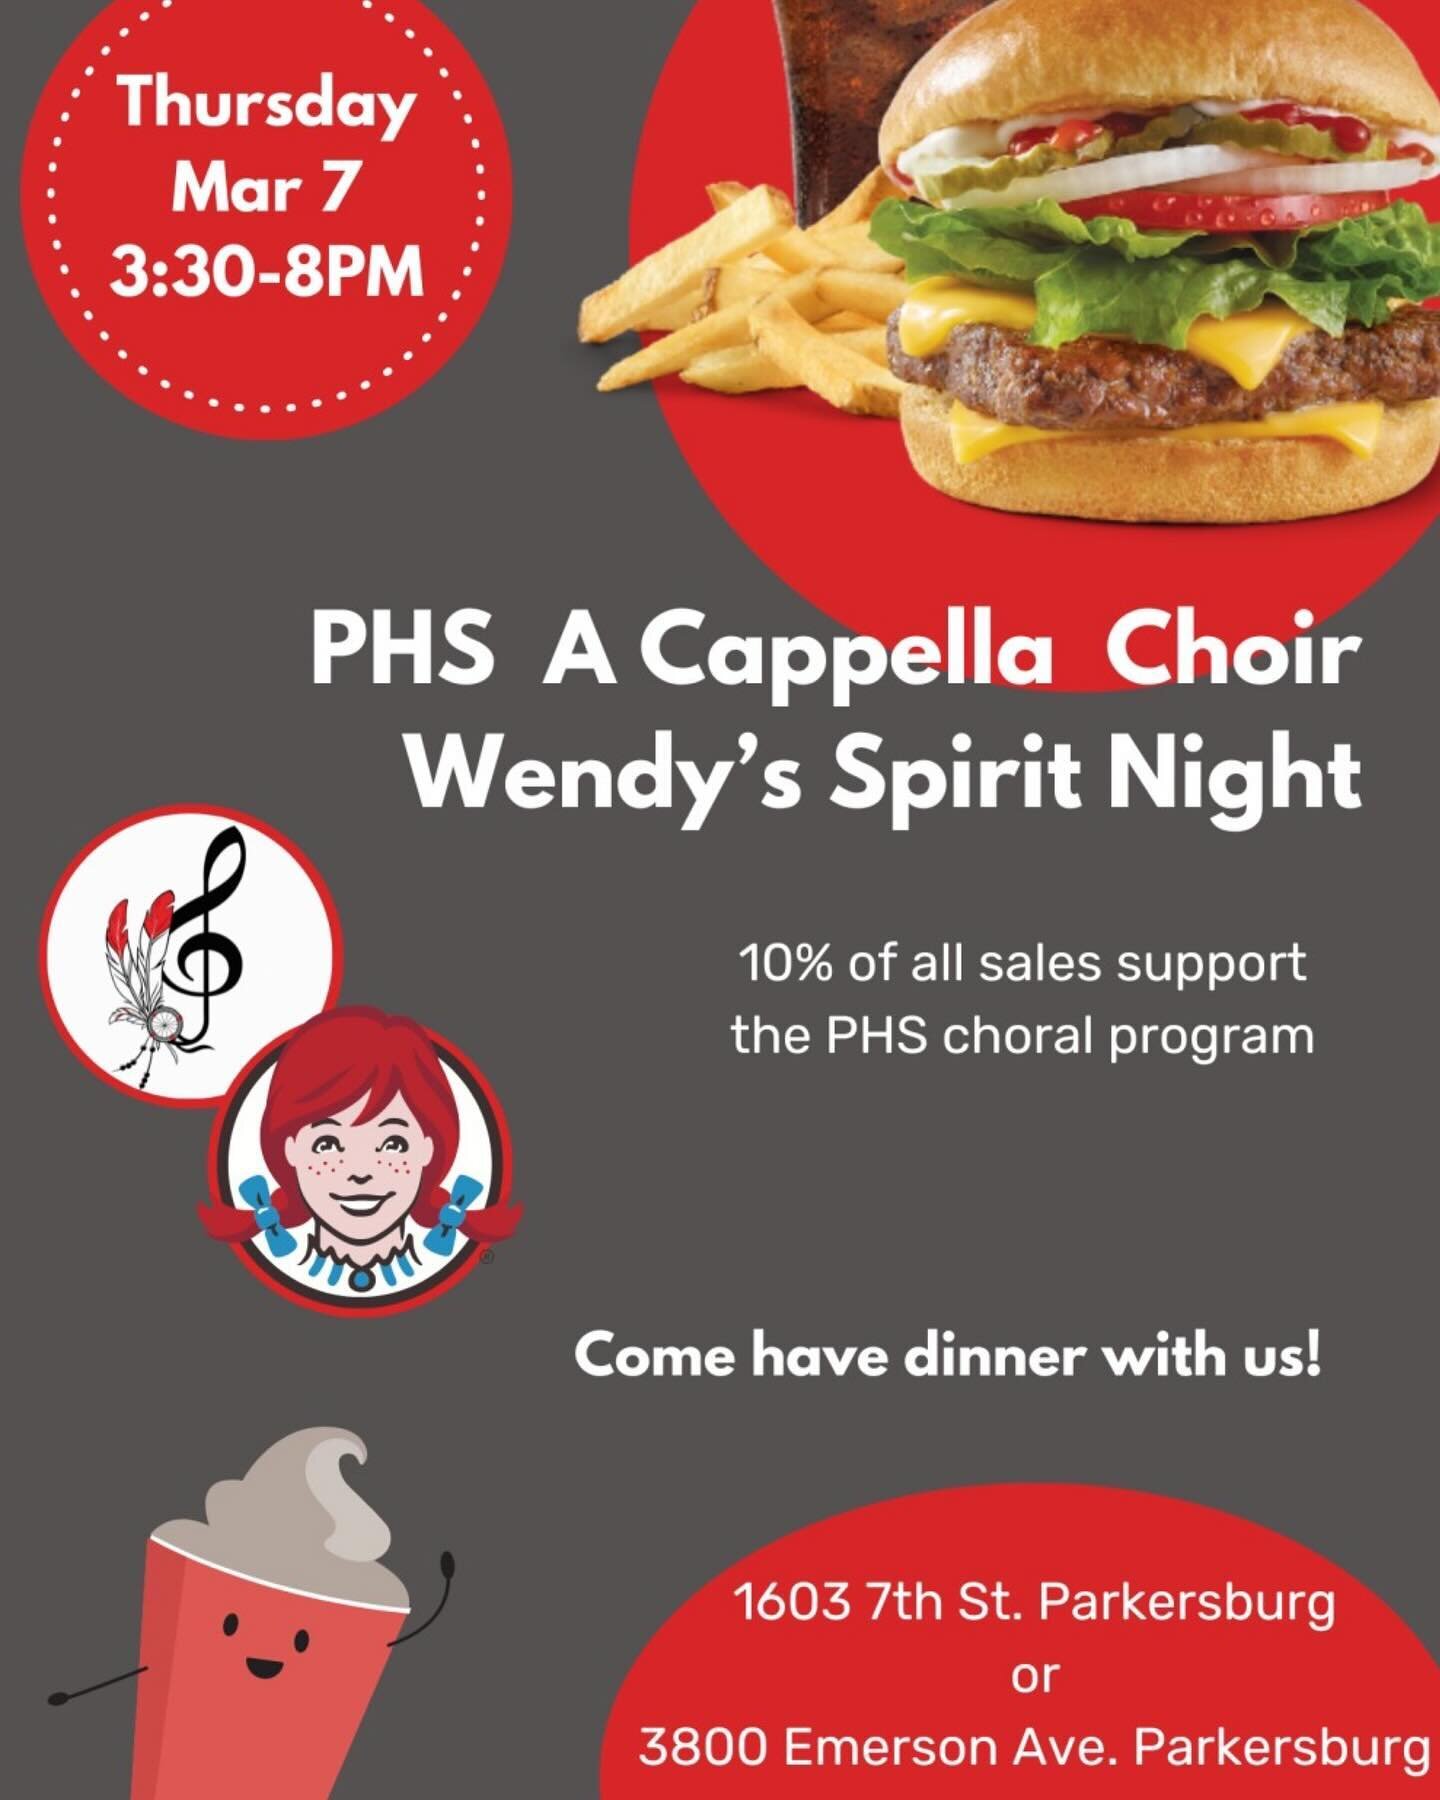 Come support the PHS A Cappella Choir next Thursday for our trip to New York!